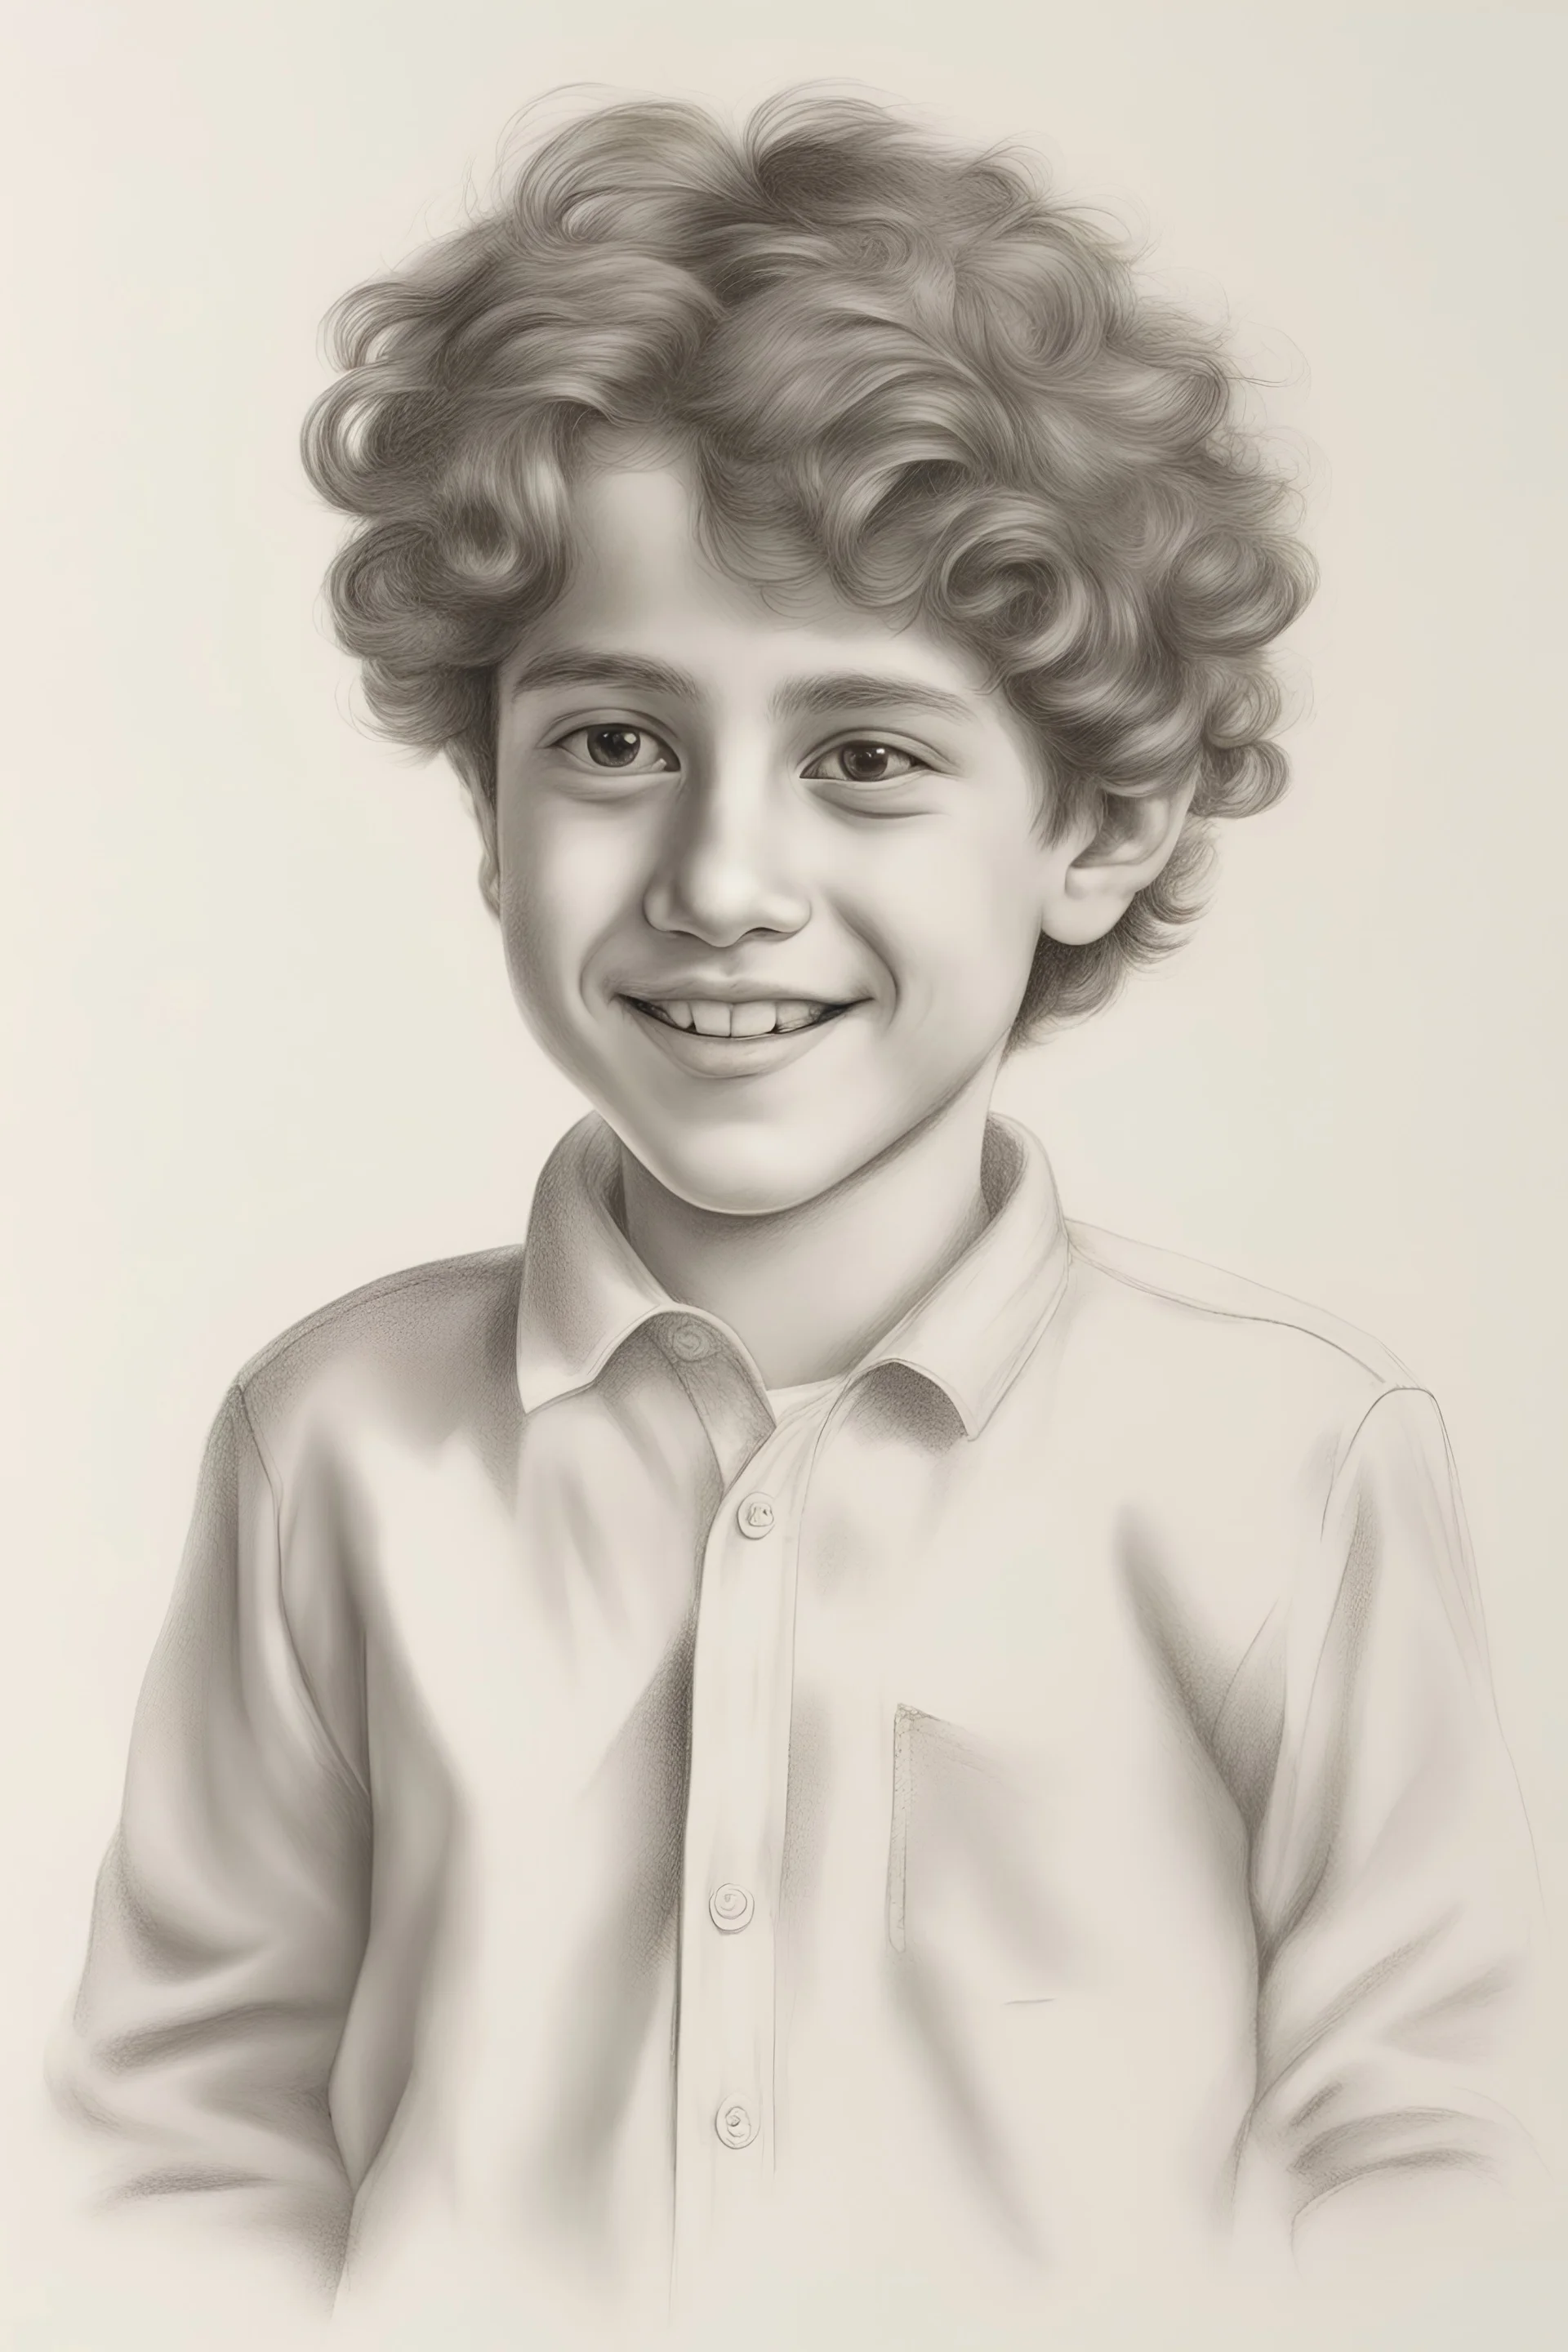 17+ Pencil Drawing Of A Boy | Hipster drawings, Girl drawing images, Boy  drawing